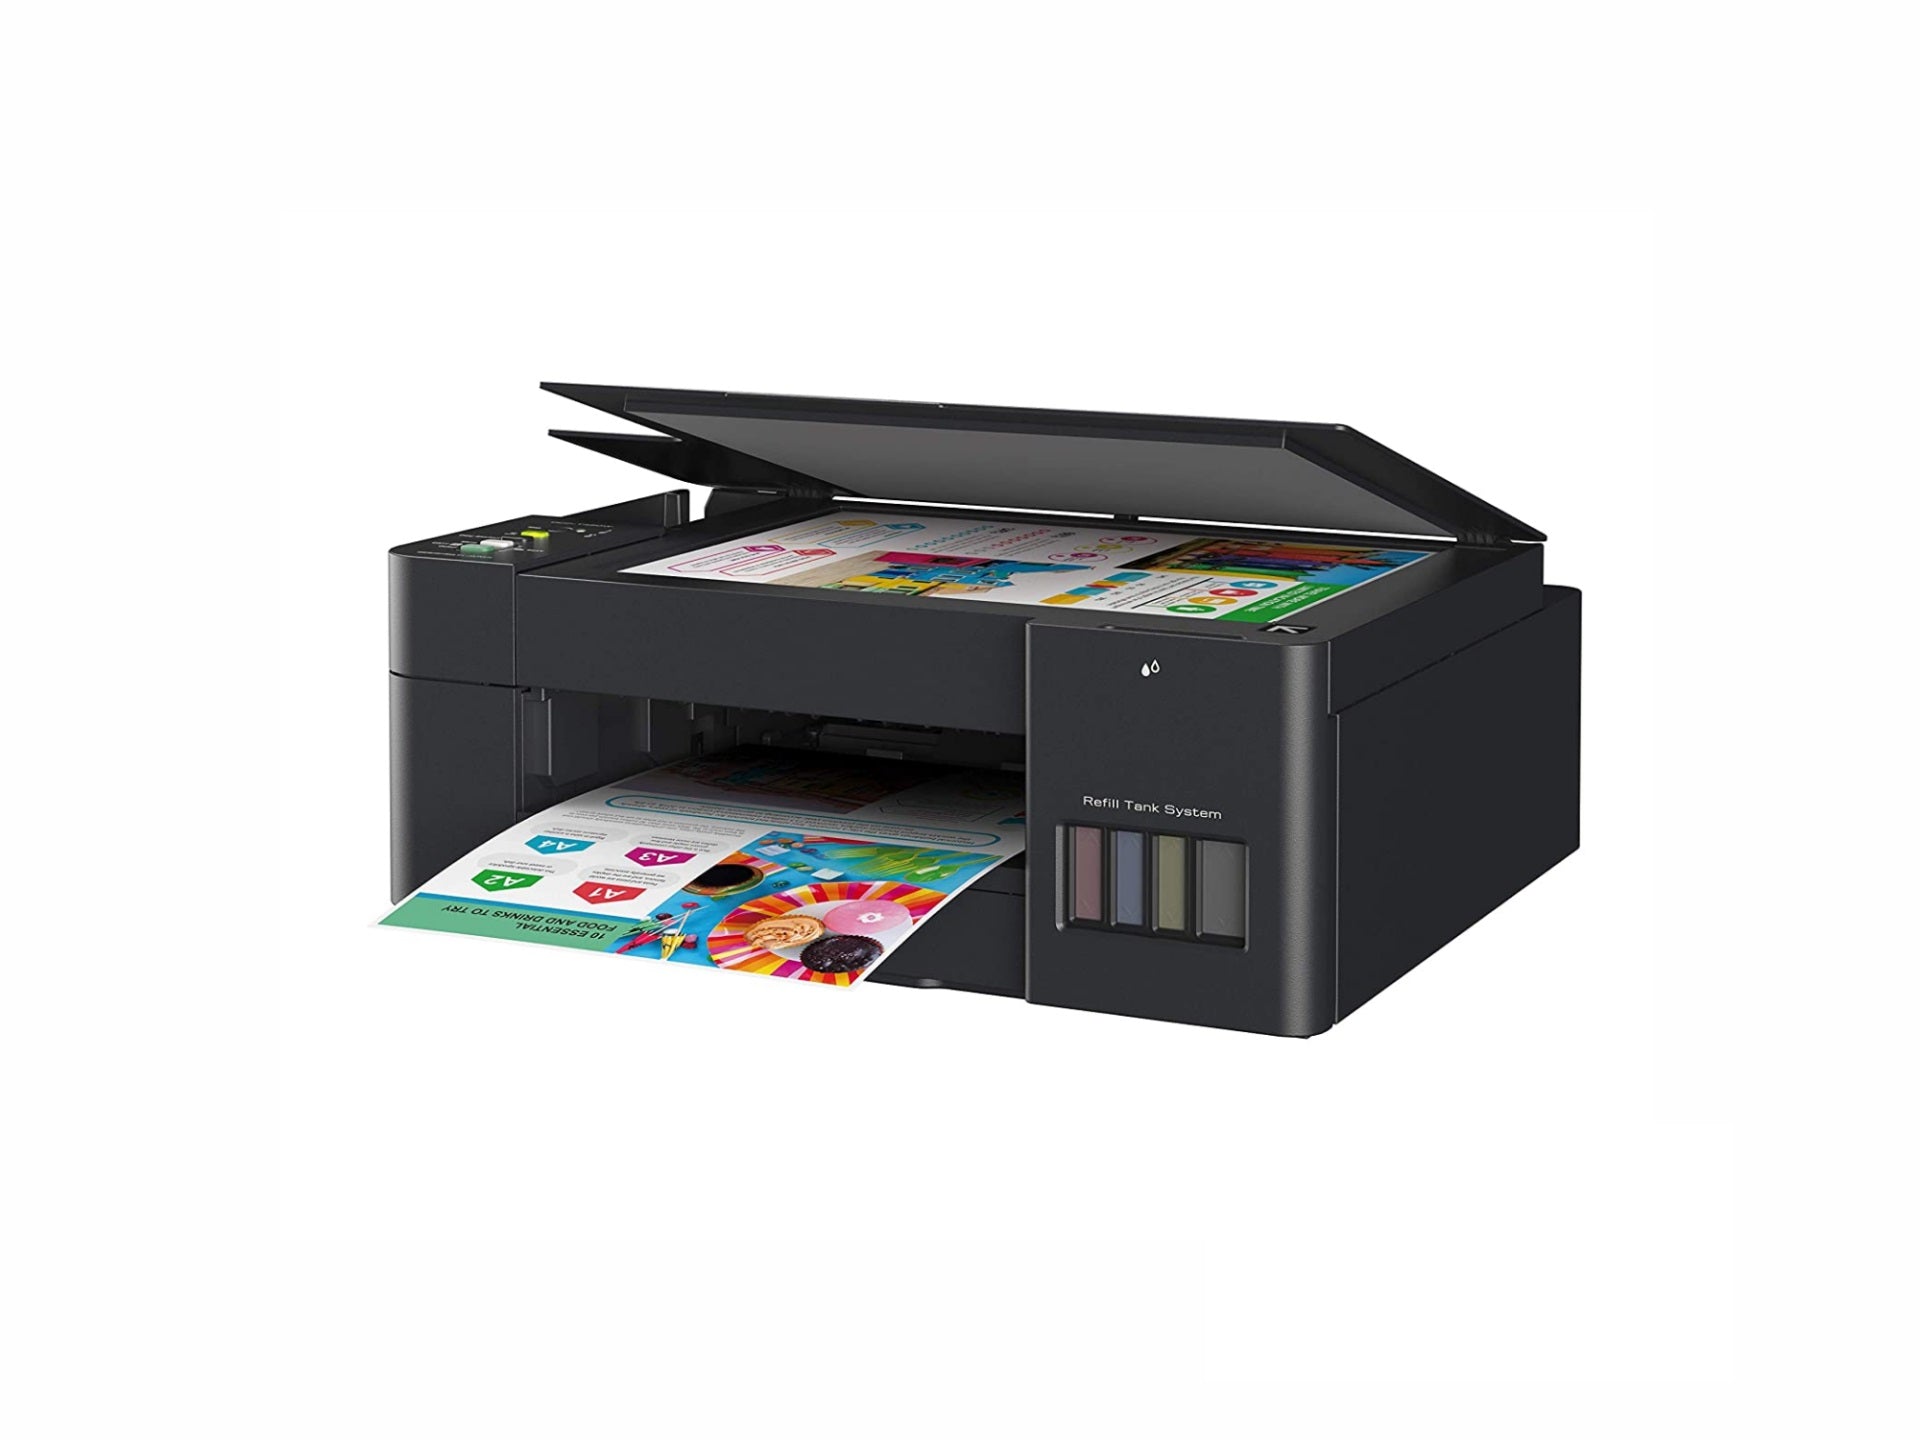 Brother DCP-T420W 3 in 1 Printer